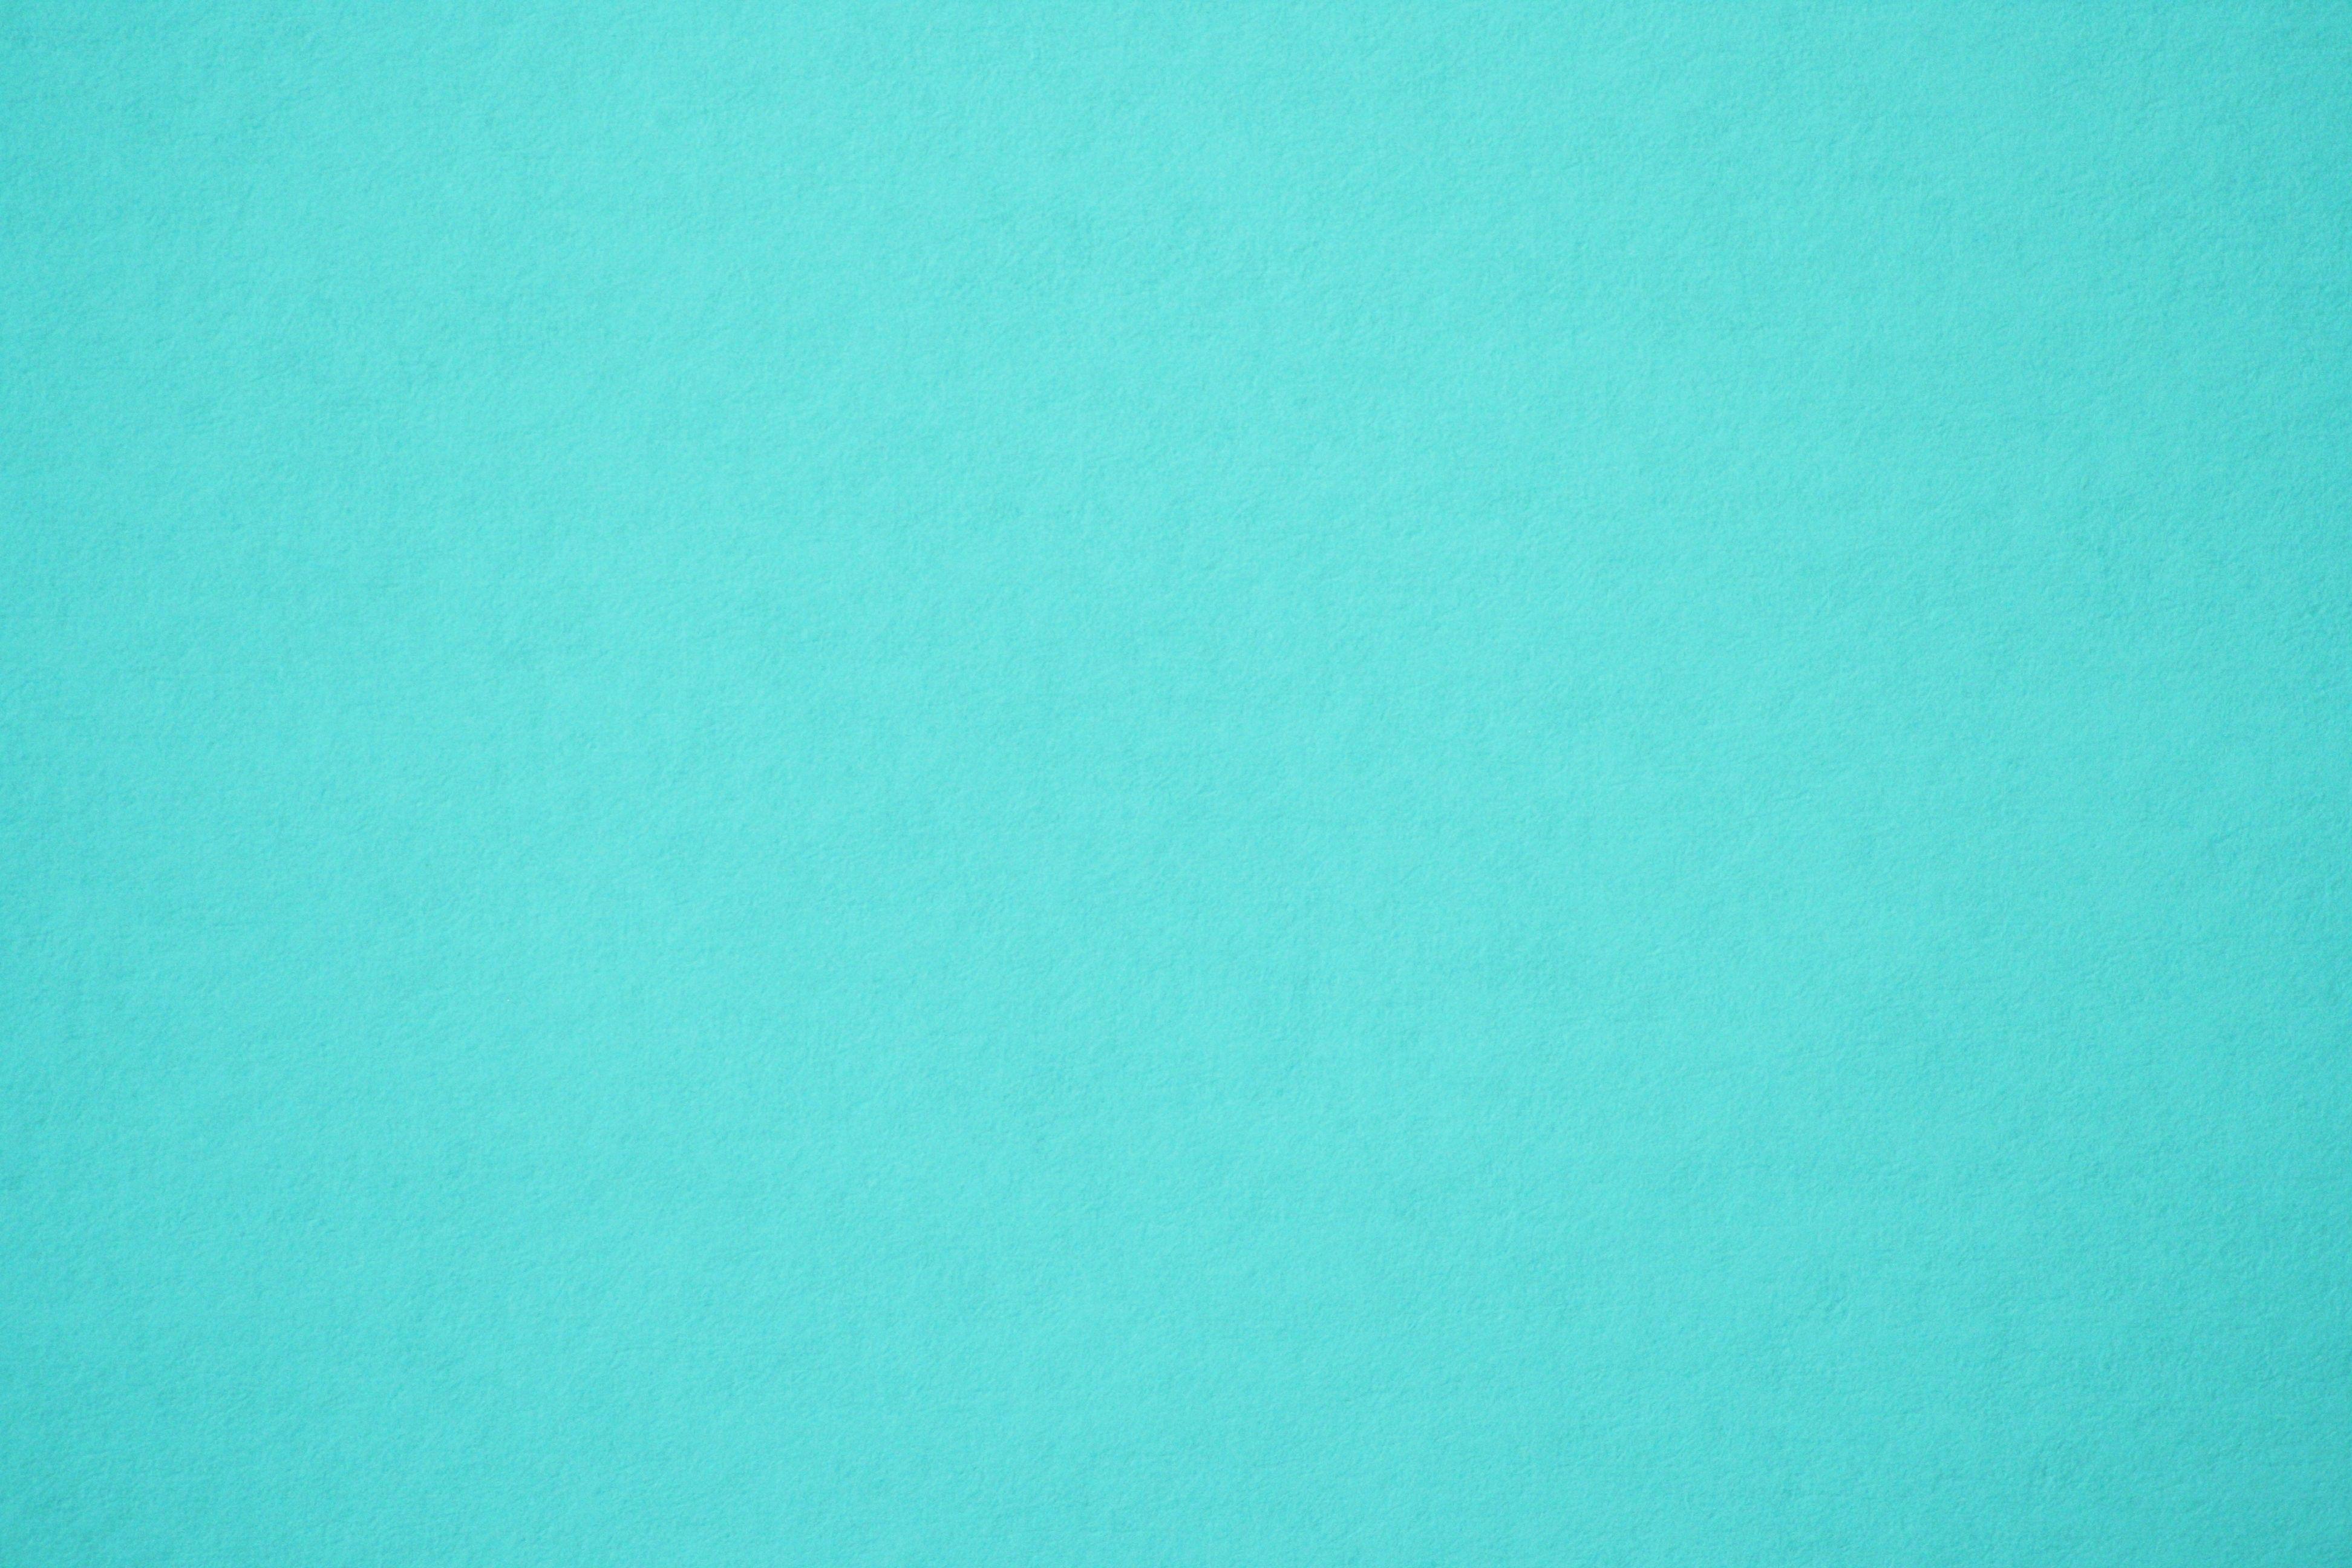 Teal backgroundDownload free amazing full HD background